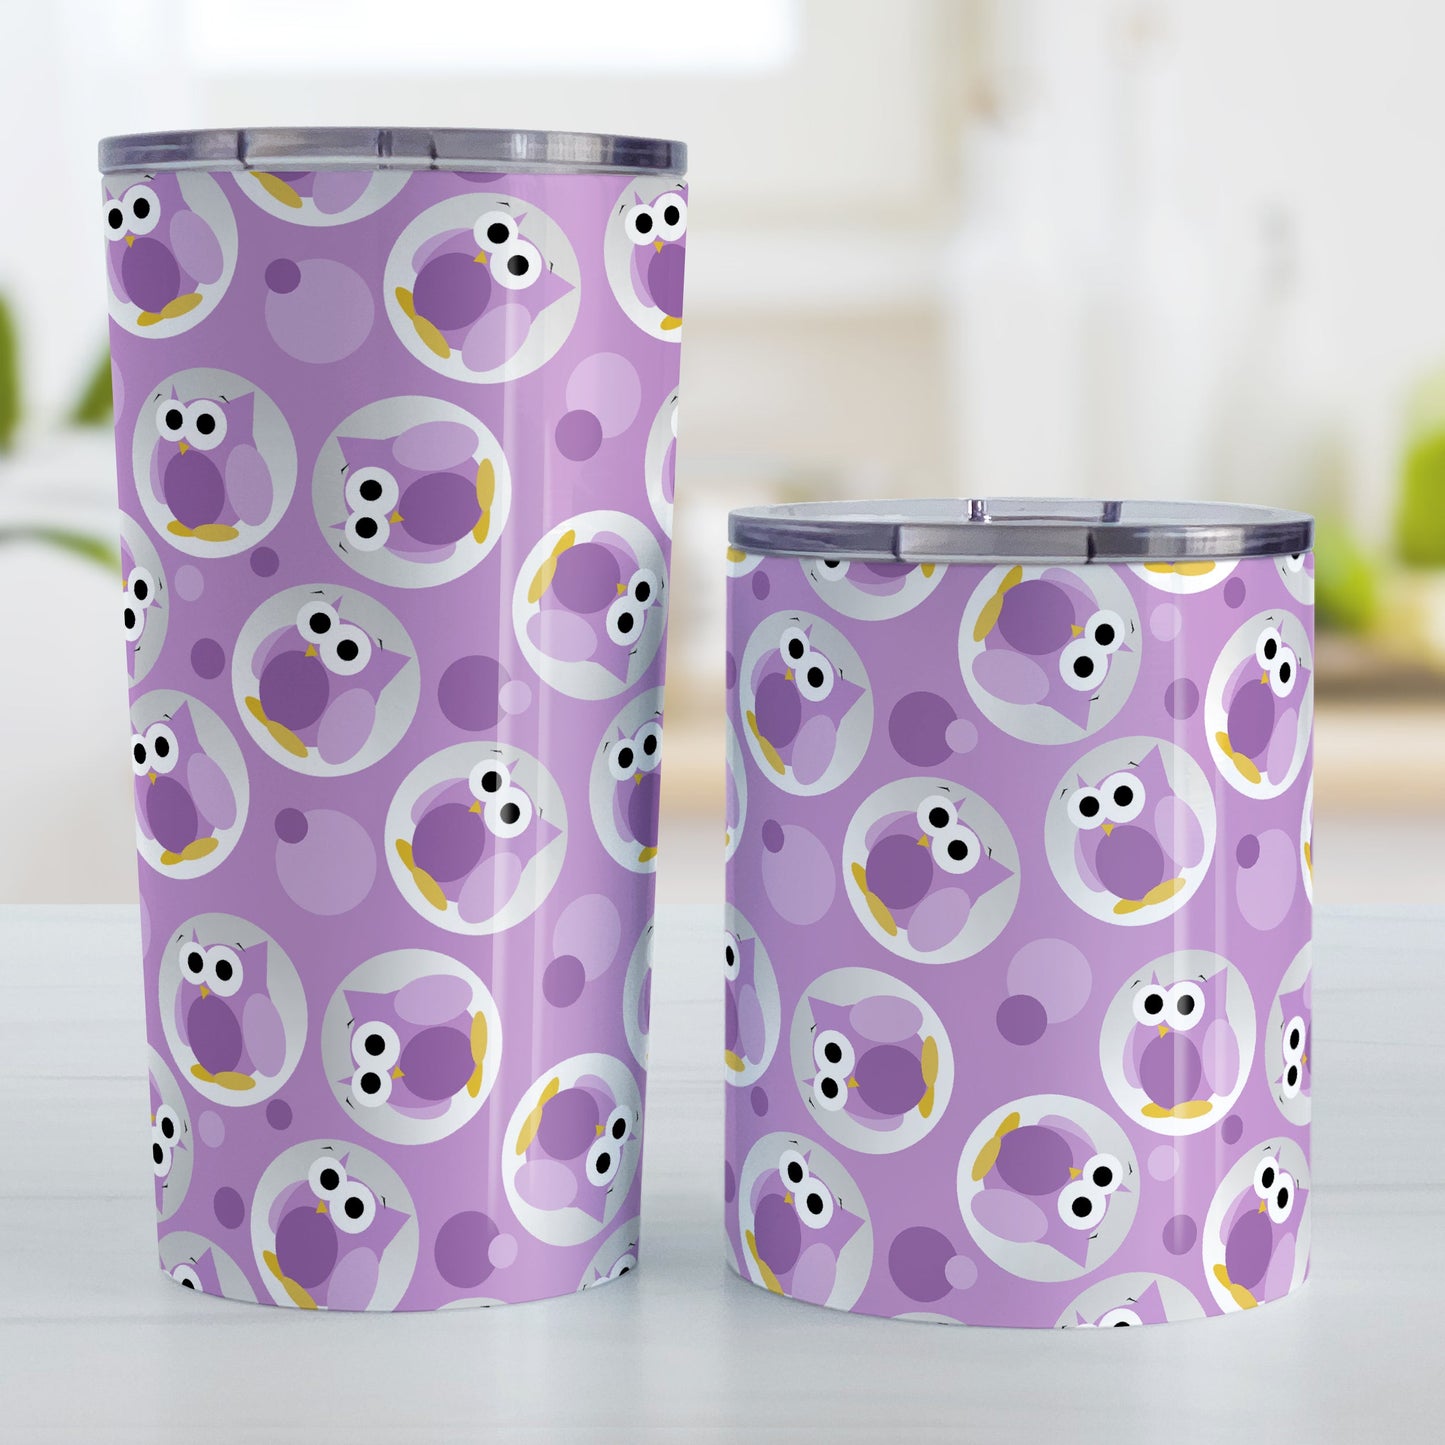 Funny Cute Purple Owl Pattern Tumbler Cup (20oz and 10oz, stainless steel insulated) at Amy's Coffee Mugs